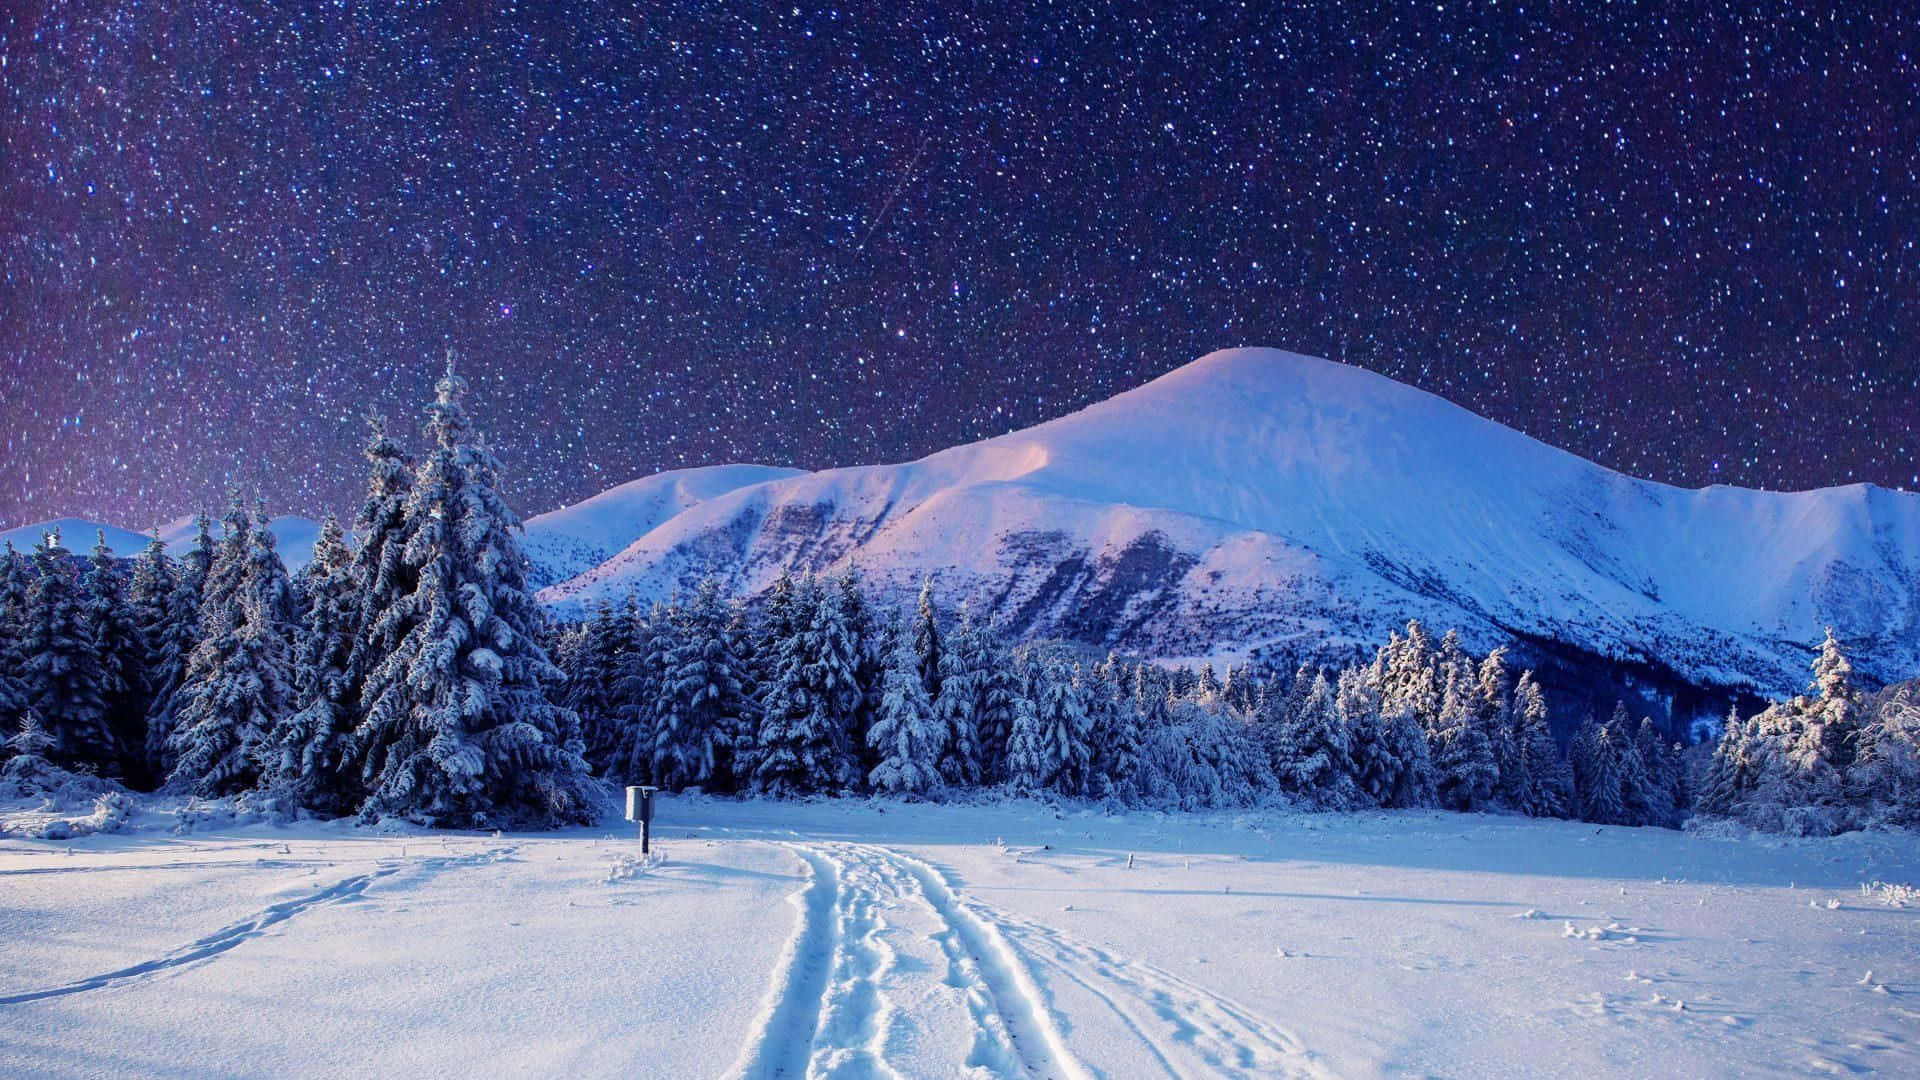 "This winter season, enjoy the best scenery with crystal clear resolution."